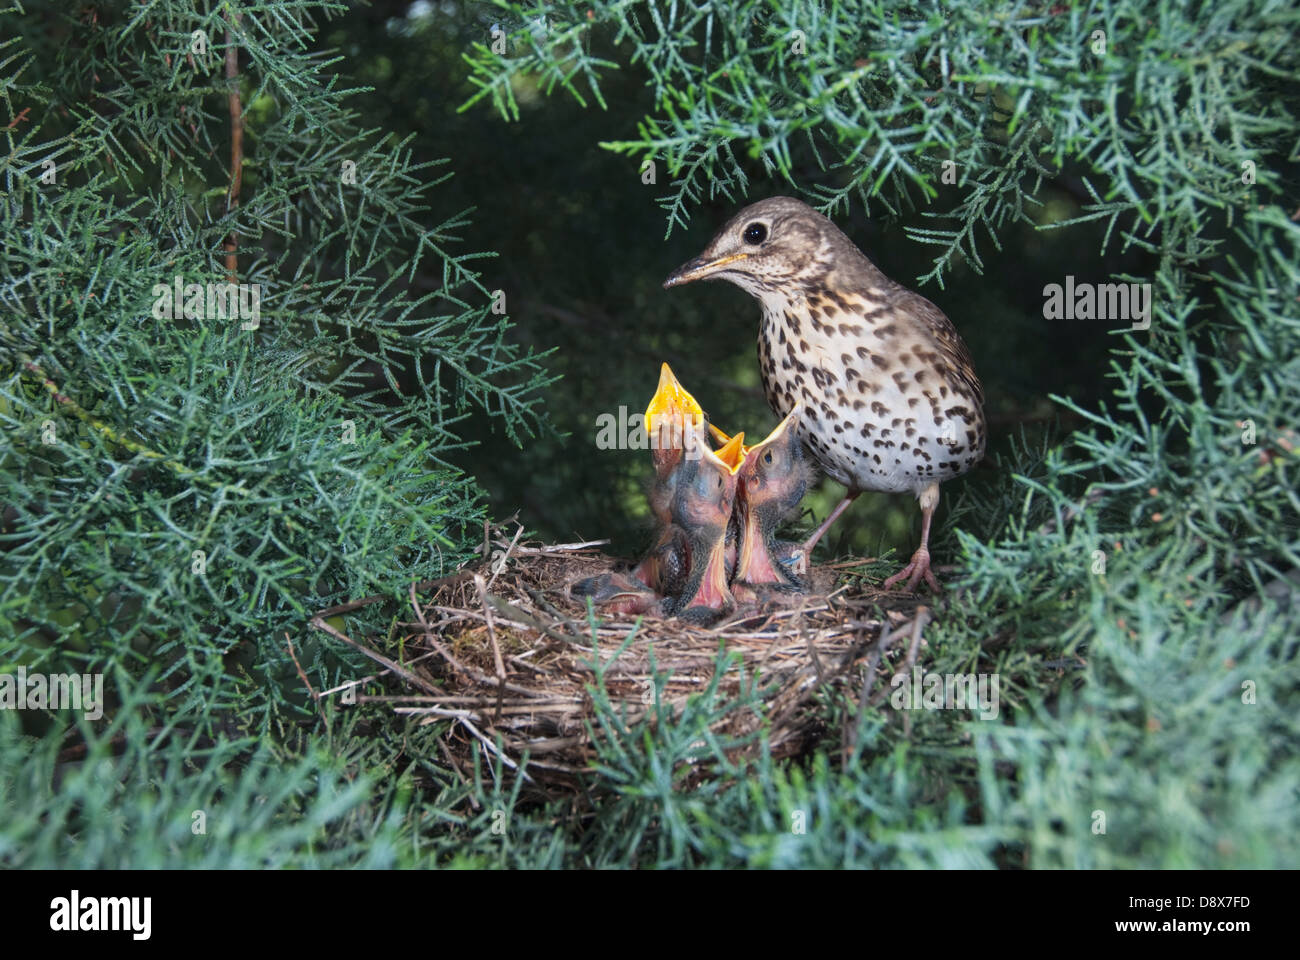 Song thrush (Turdus philomelos) at nest with chicks Stock Photo